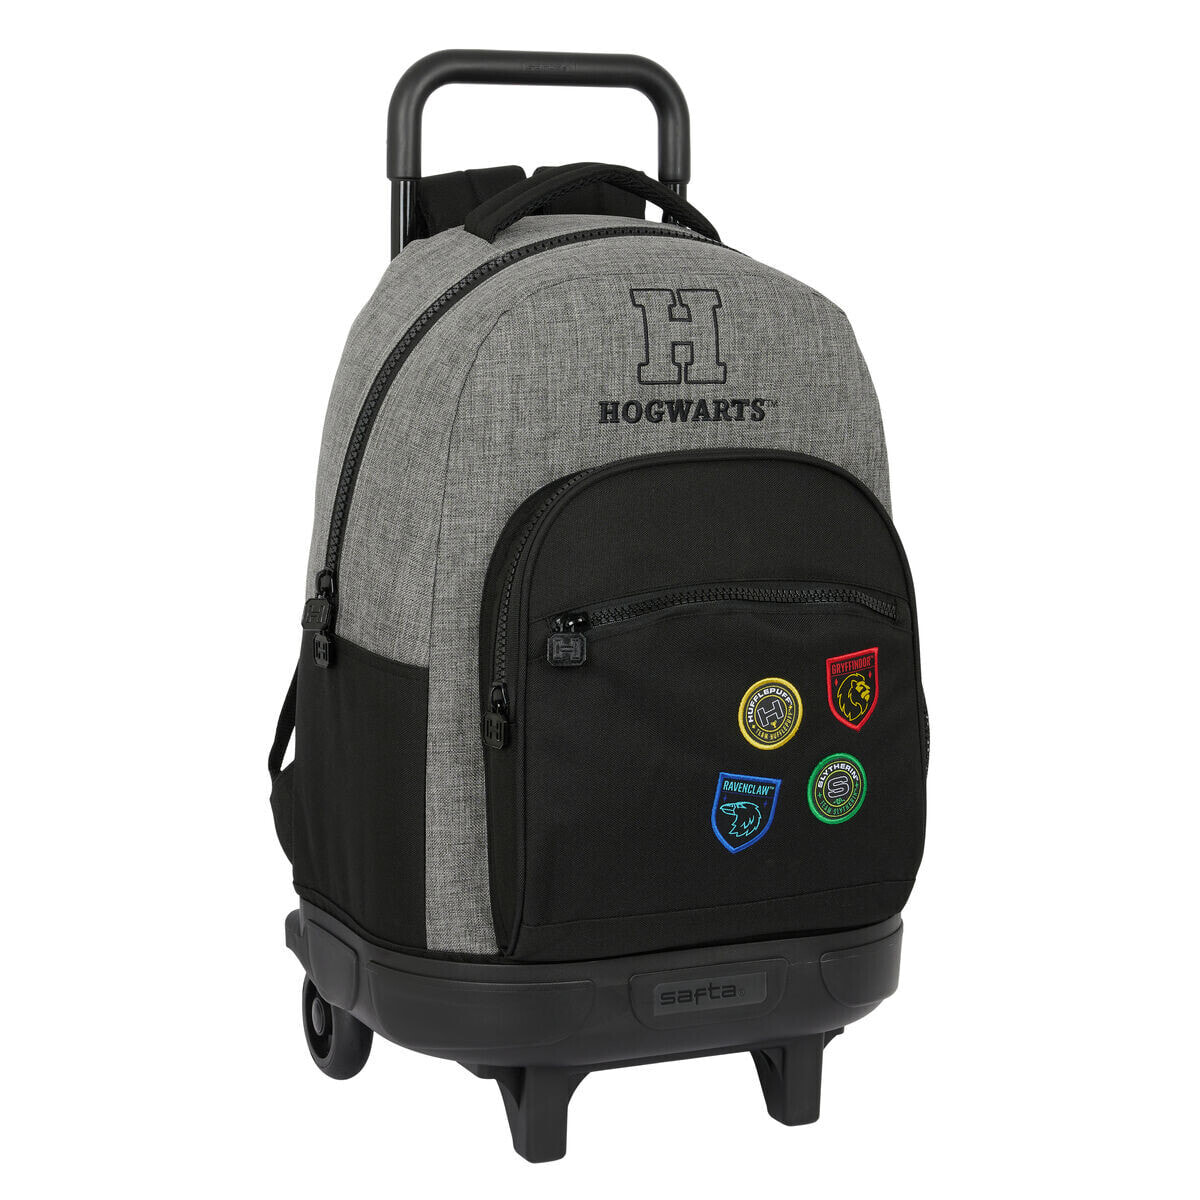 School Rucksack with Wheels Harry Potter House of champions Black Grey 33 X 45 X 22 cm